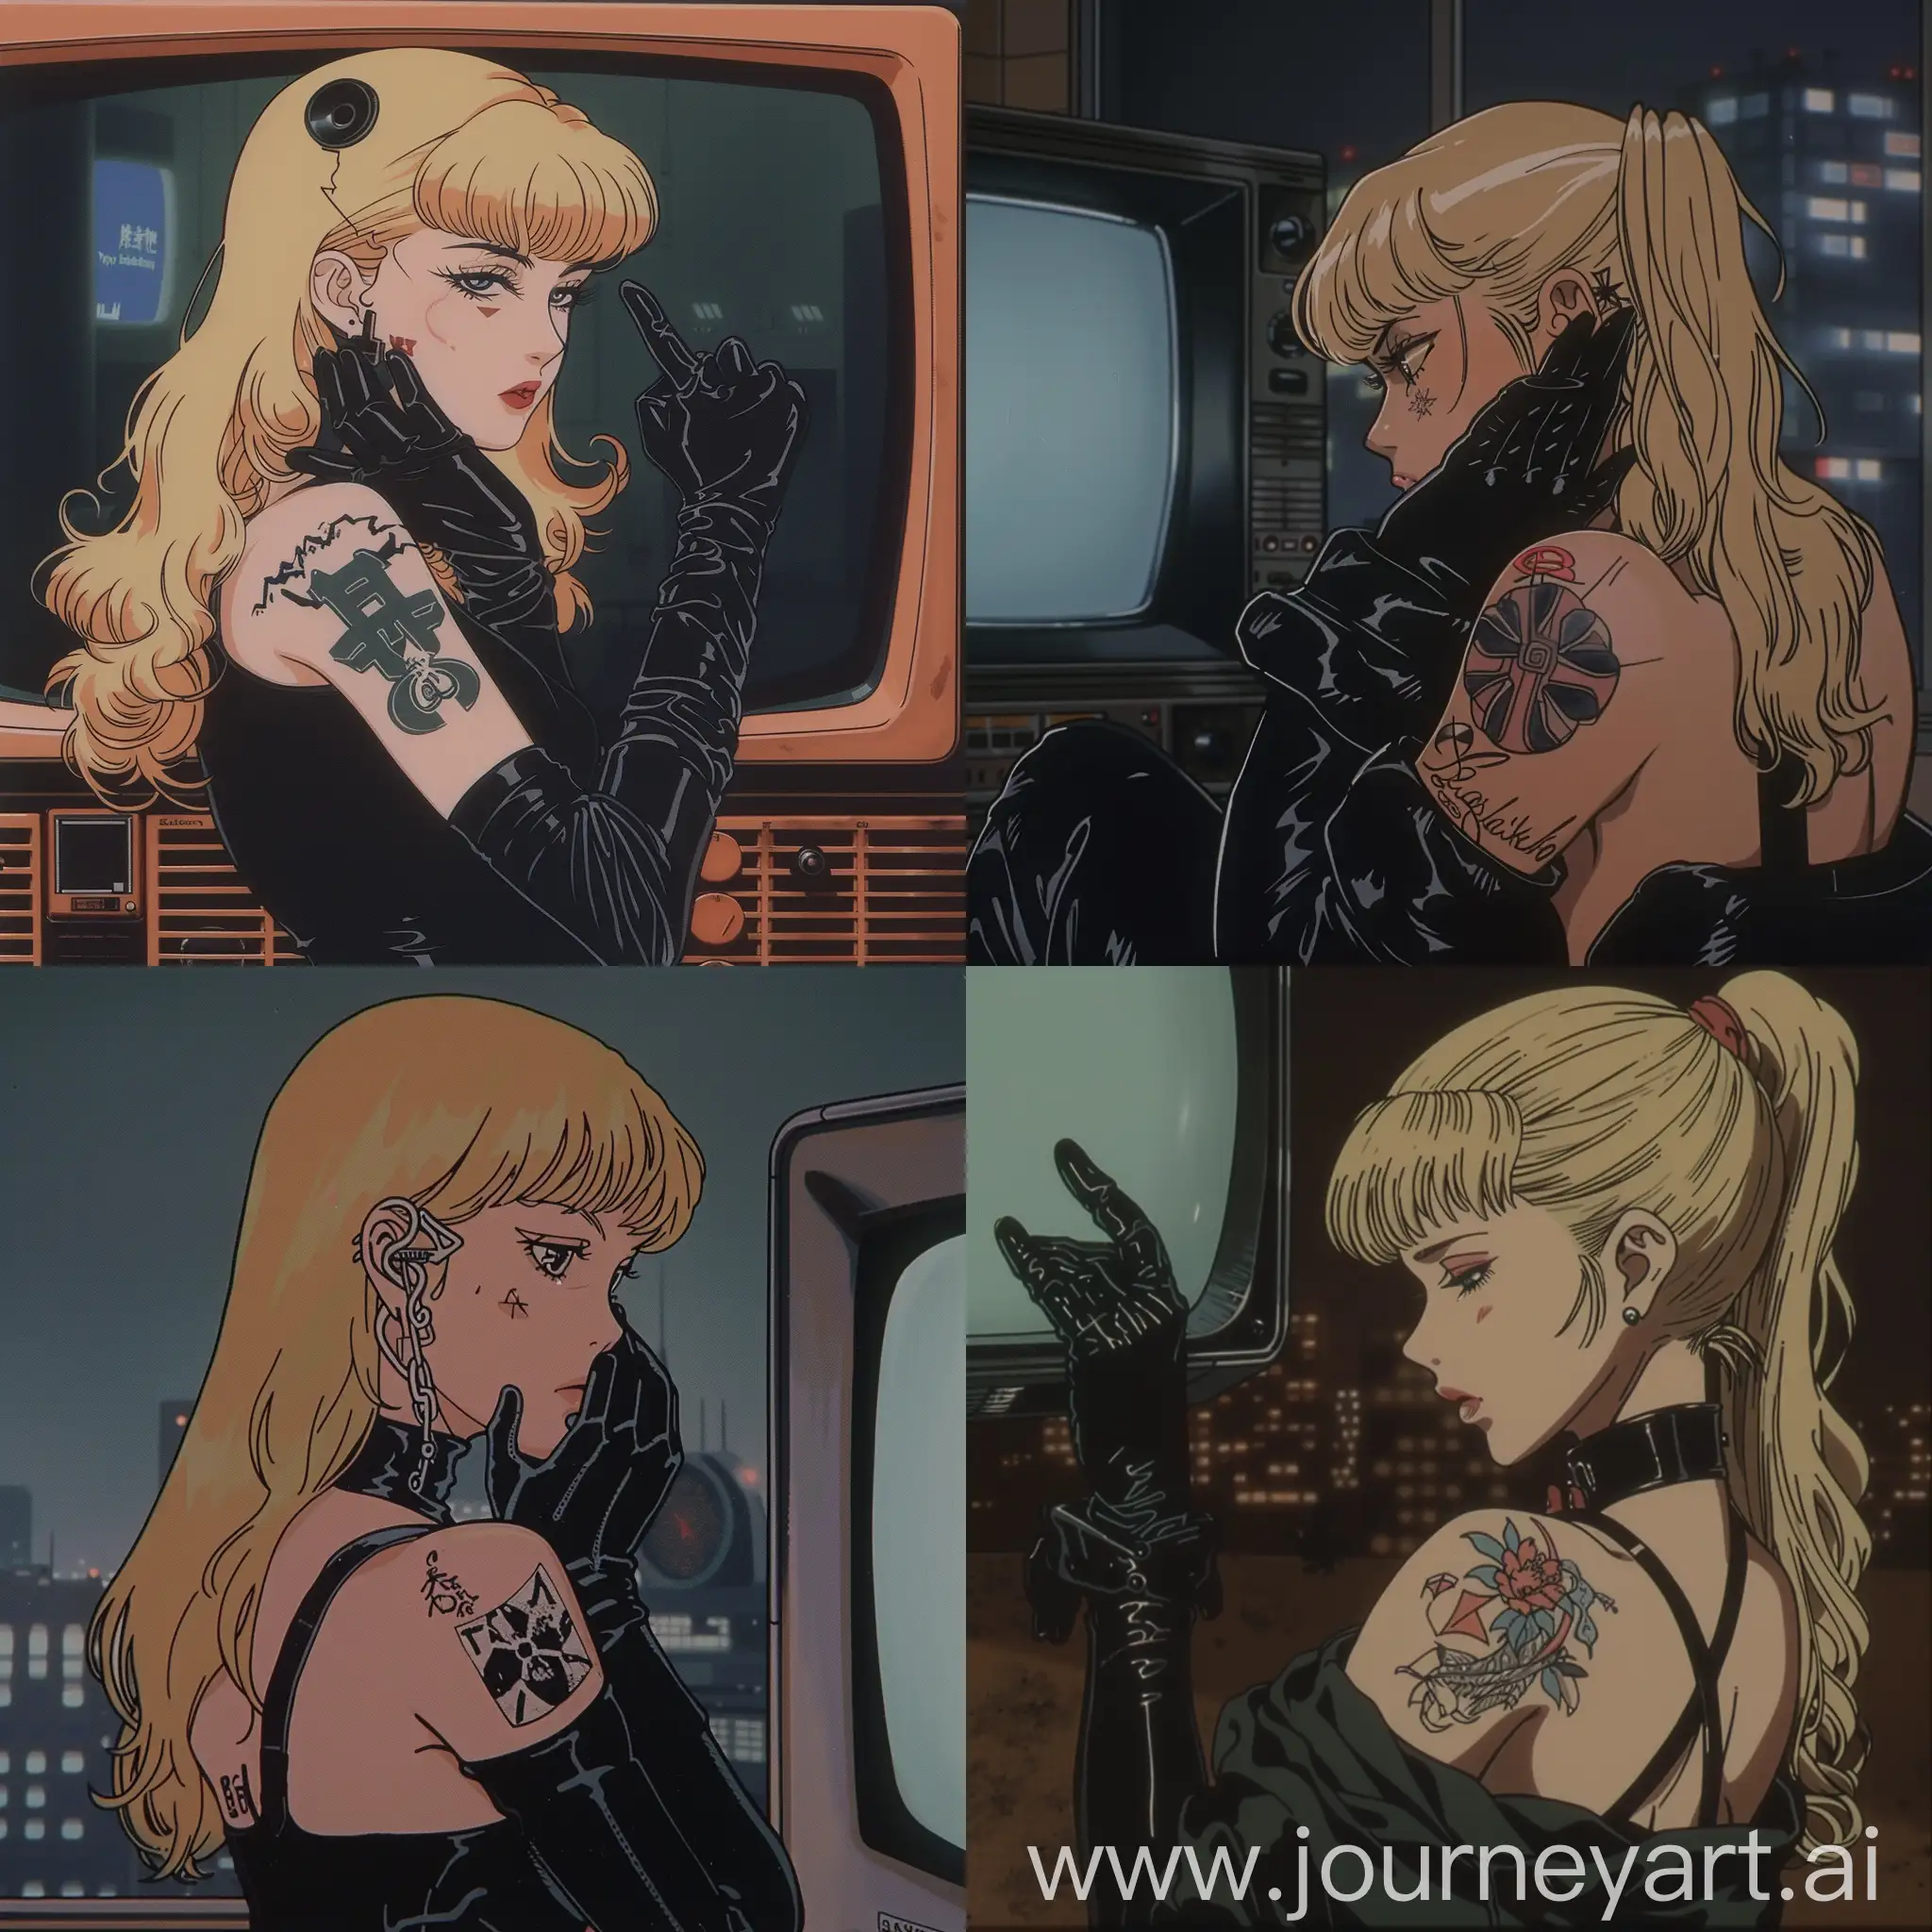 Blonde-Anime-Girl-with-Tattoo-in-Retro-90s-Style-on-CRT-TV-Display